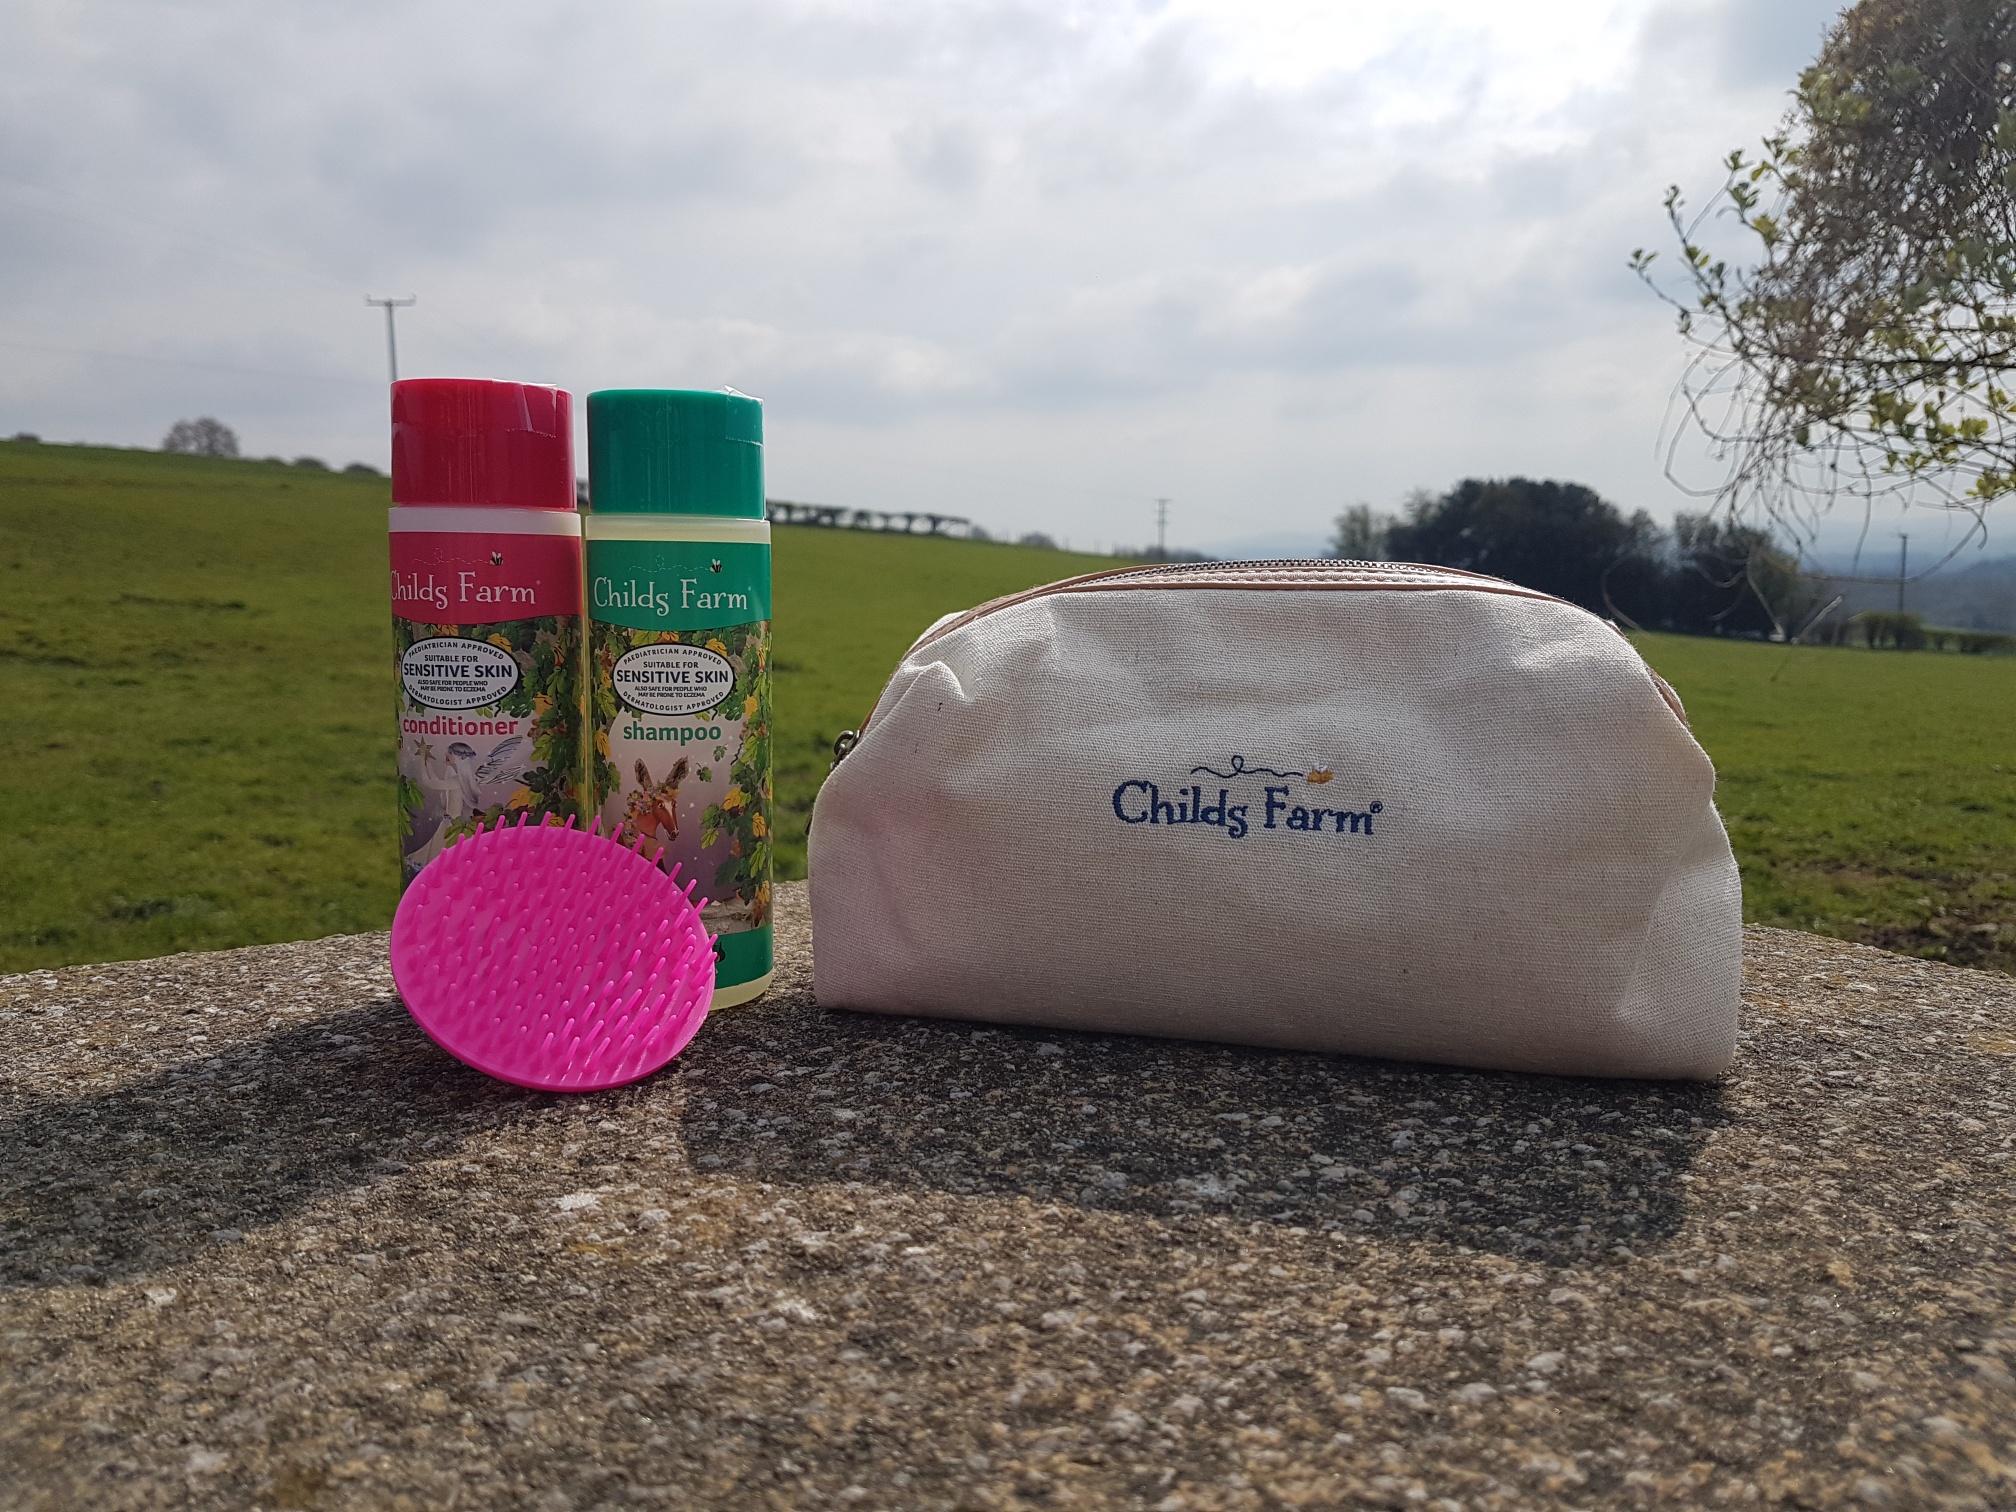 win childs farm products